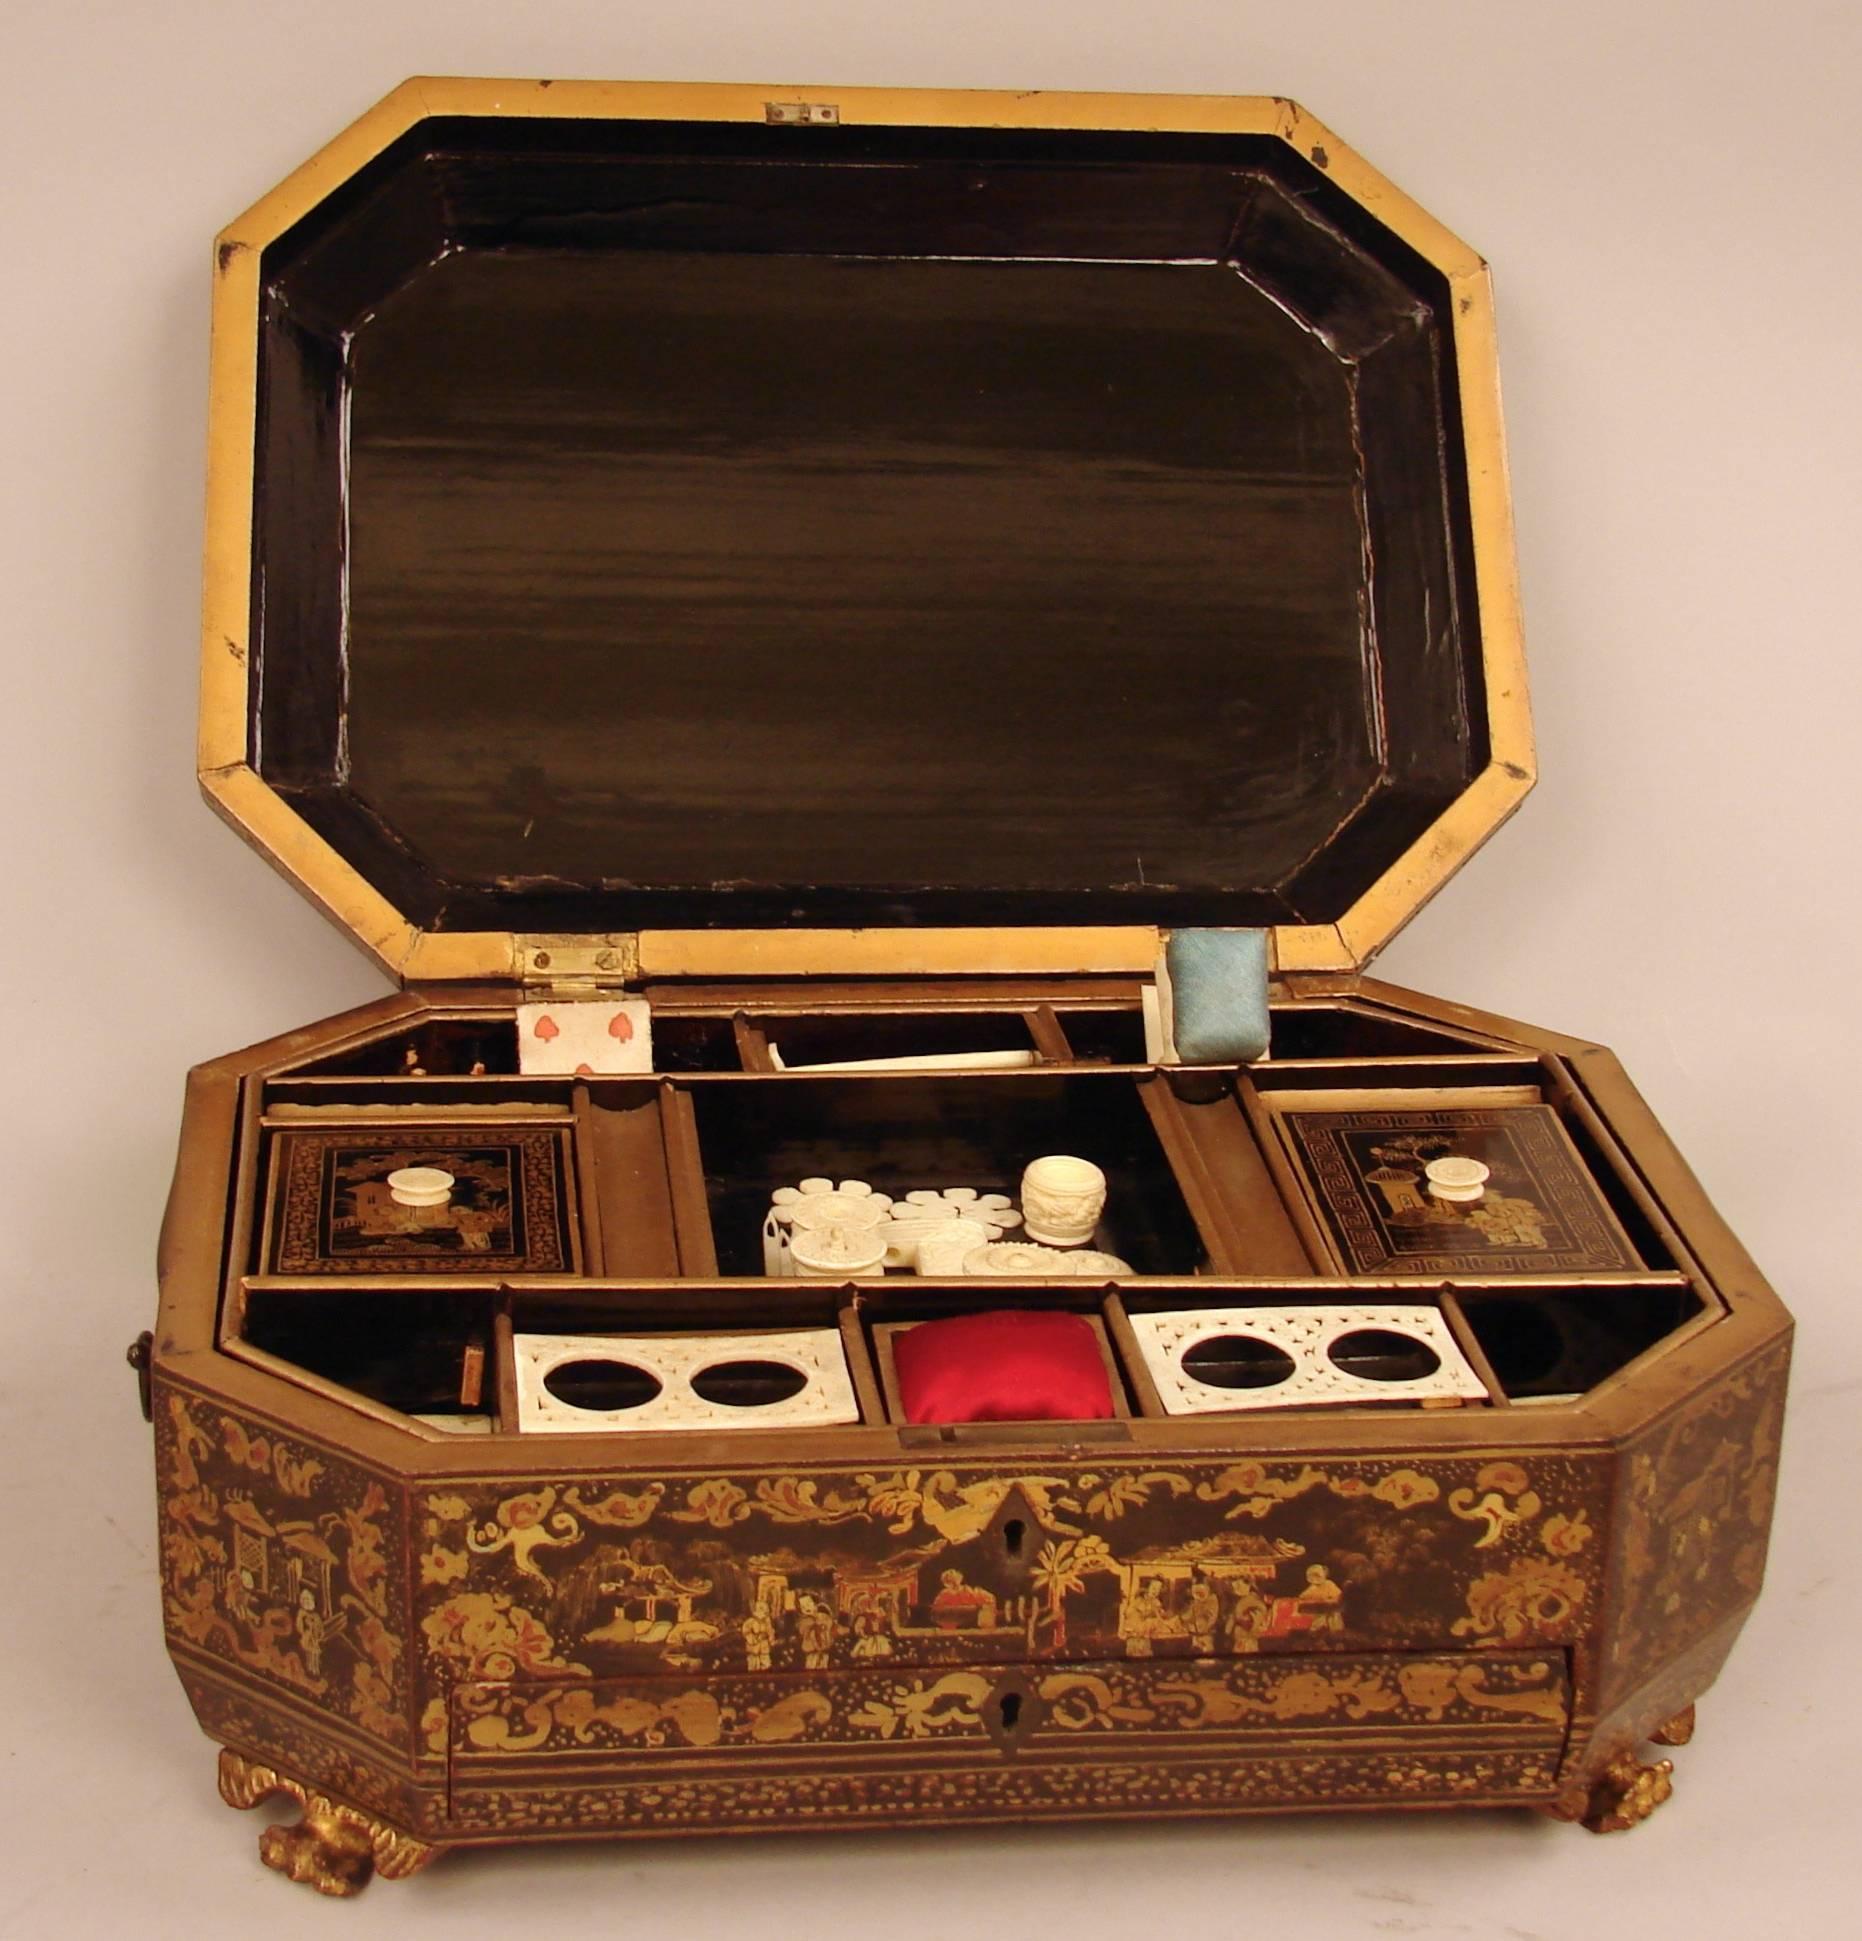 Mid-19th Century Chinese Export Sewing Box with Sewing Implements